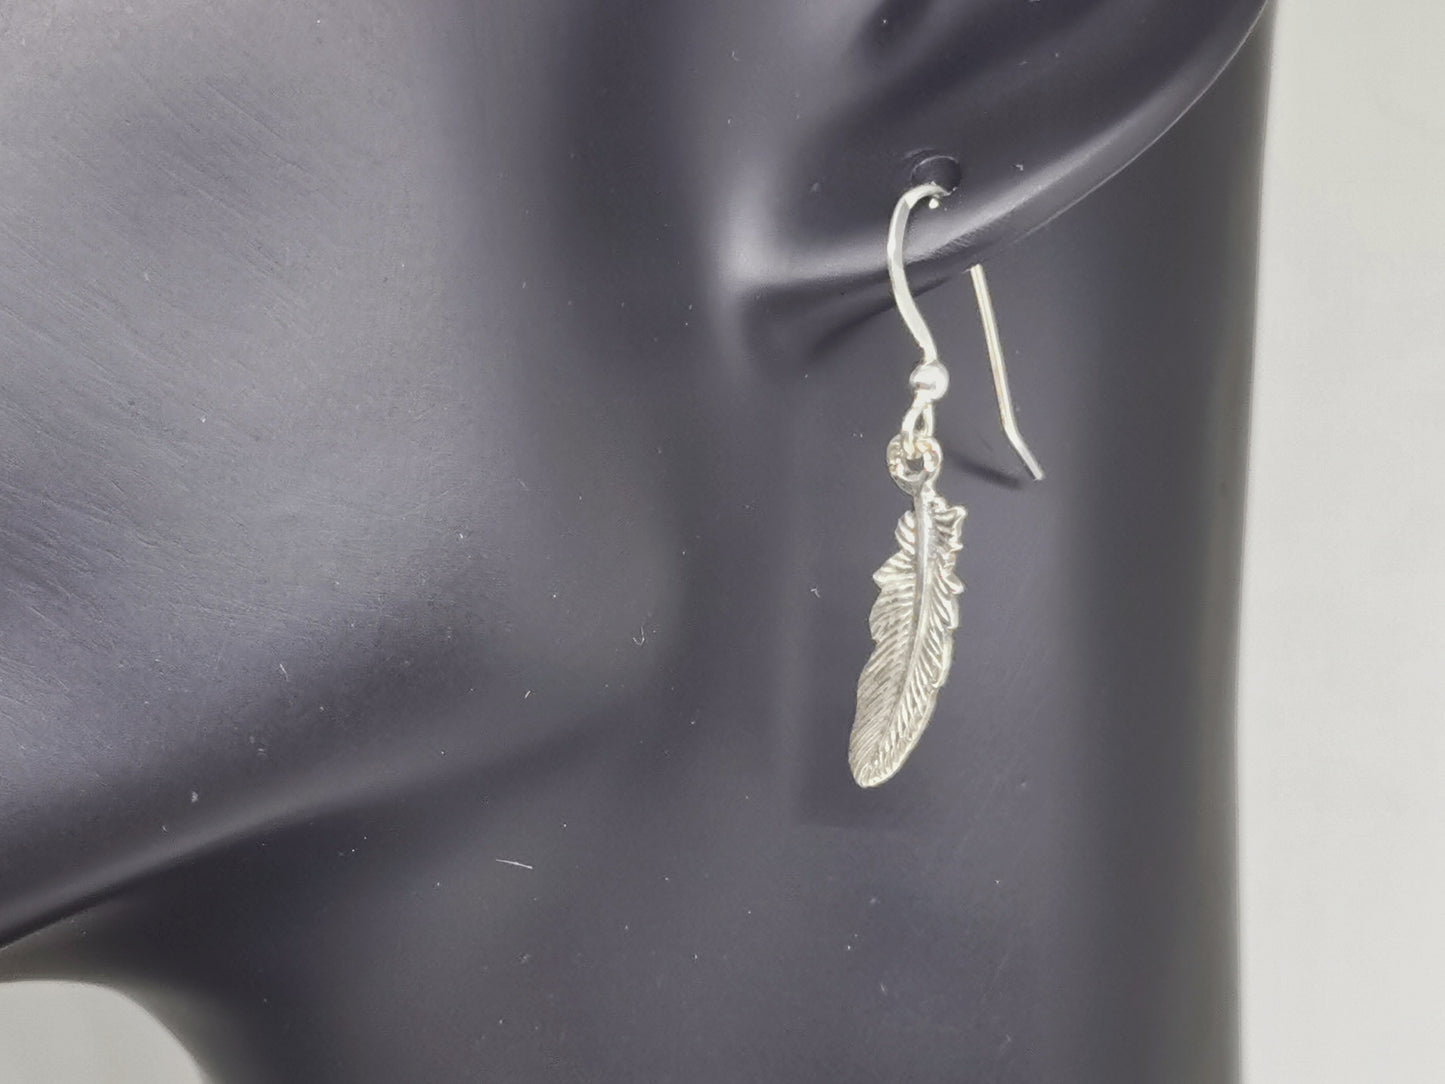 Feather Charm Earrings in Sterling Silver or Antique Bronze